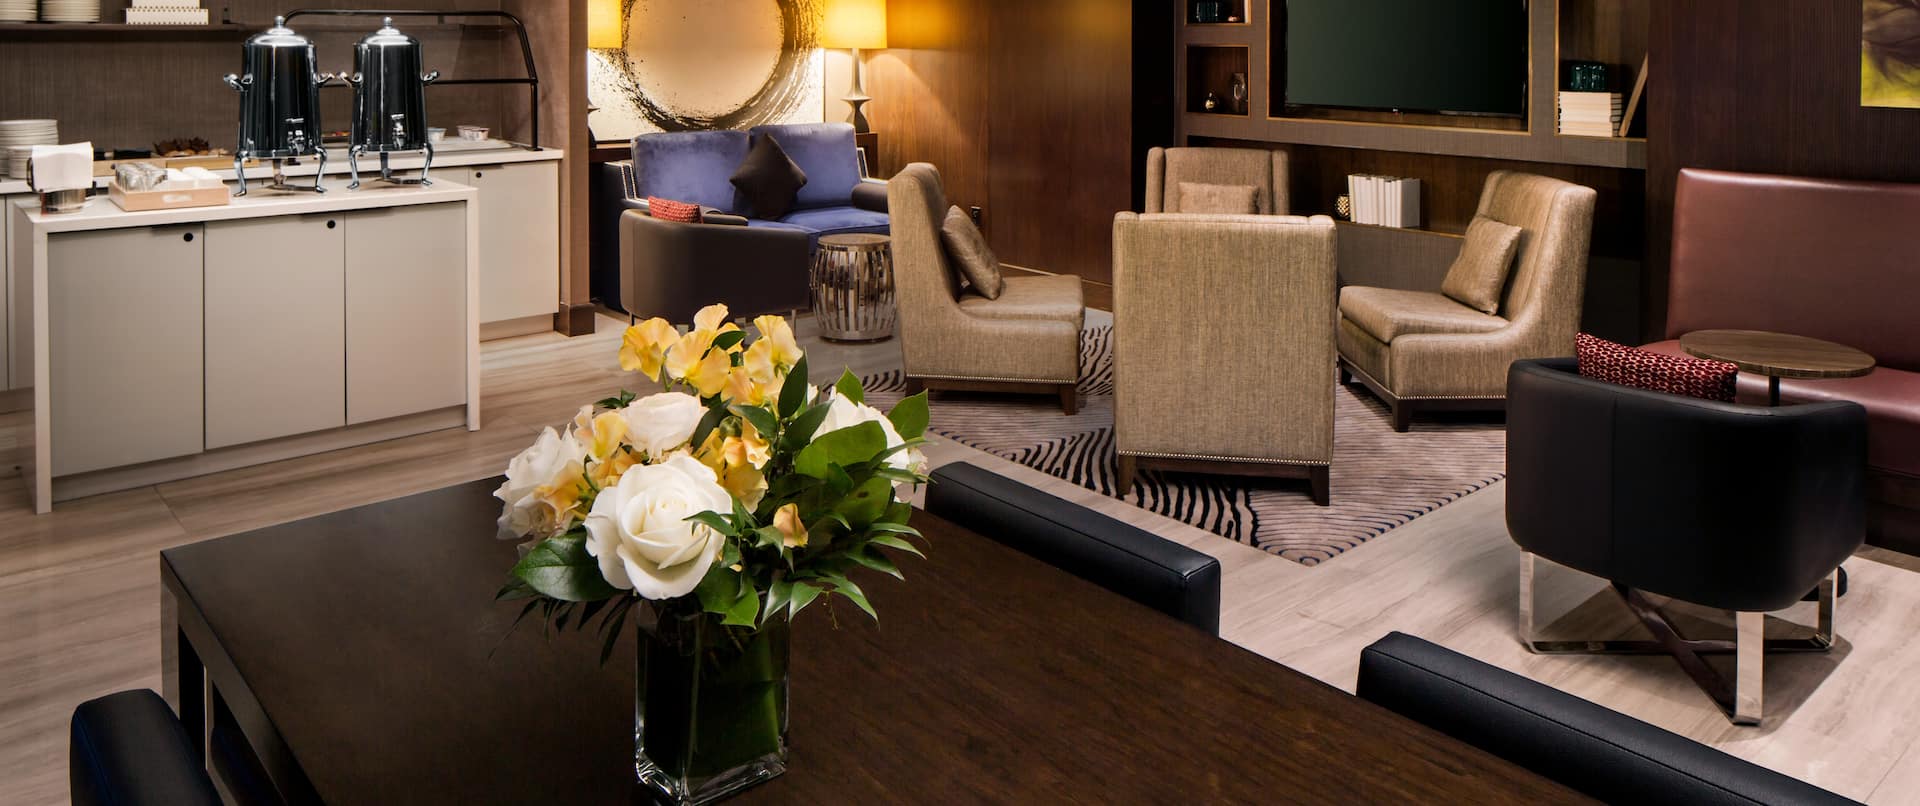 Refreshment Station, Soft Seating, Table with Flowers and Chairs in Executive Lounge